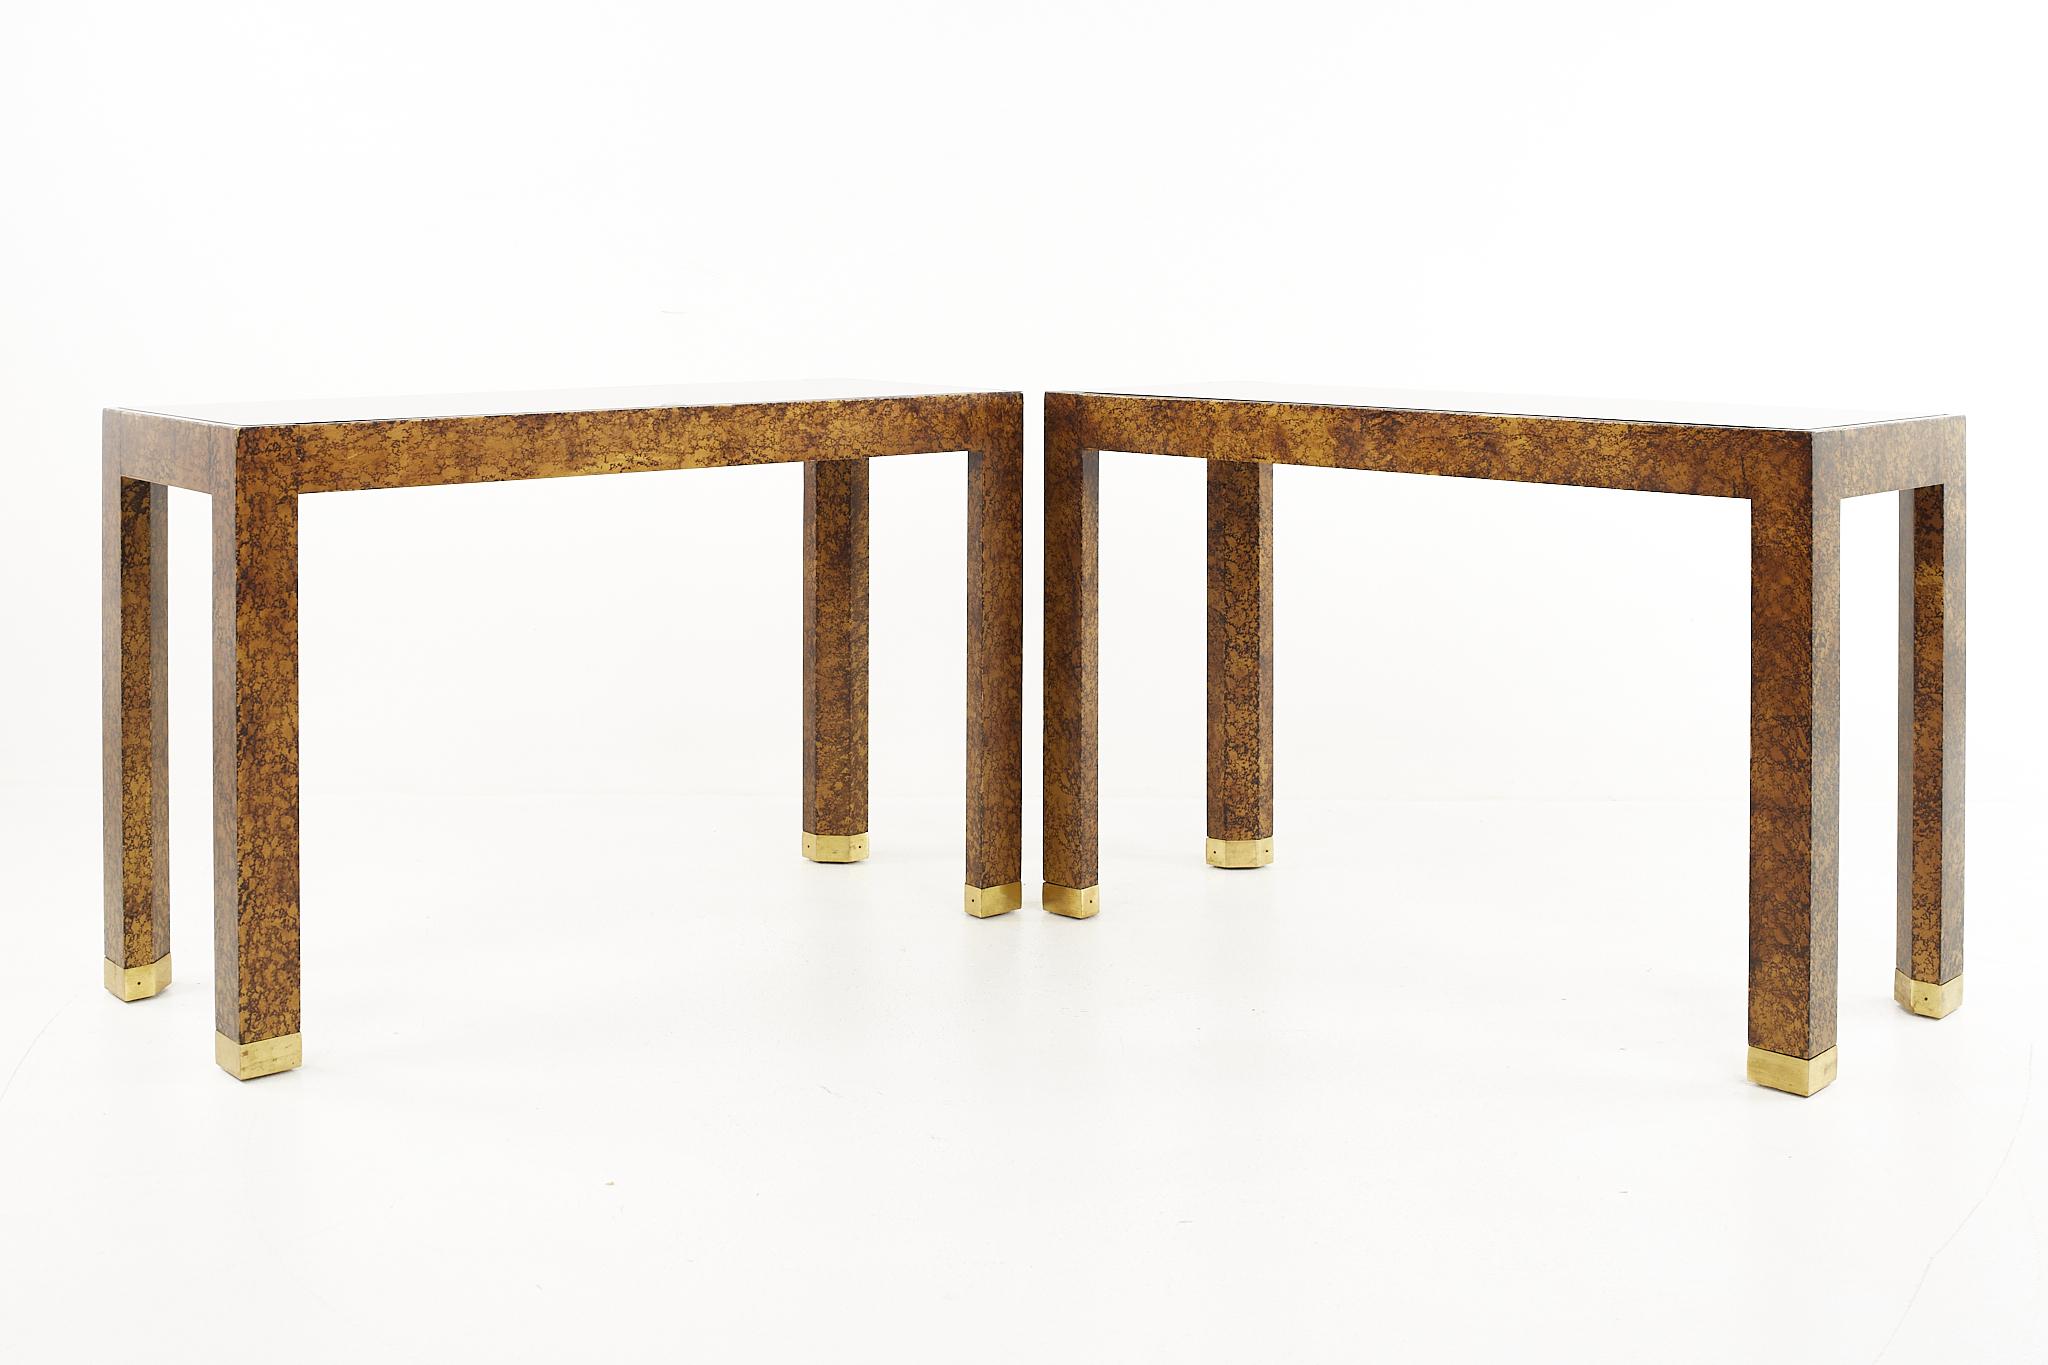 Henredon Mid Century Faux Tortoise Shell console tables - A Pair

Each table measures: 39 wide x 15 deep x 25 inches high 

All pieces of furniture can be had in what we call restored vintage condition. That means the piece is restored upon